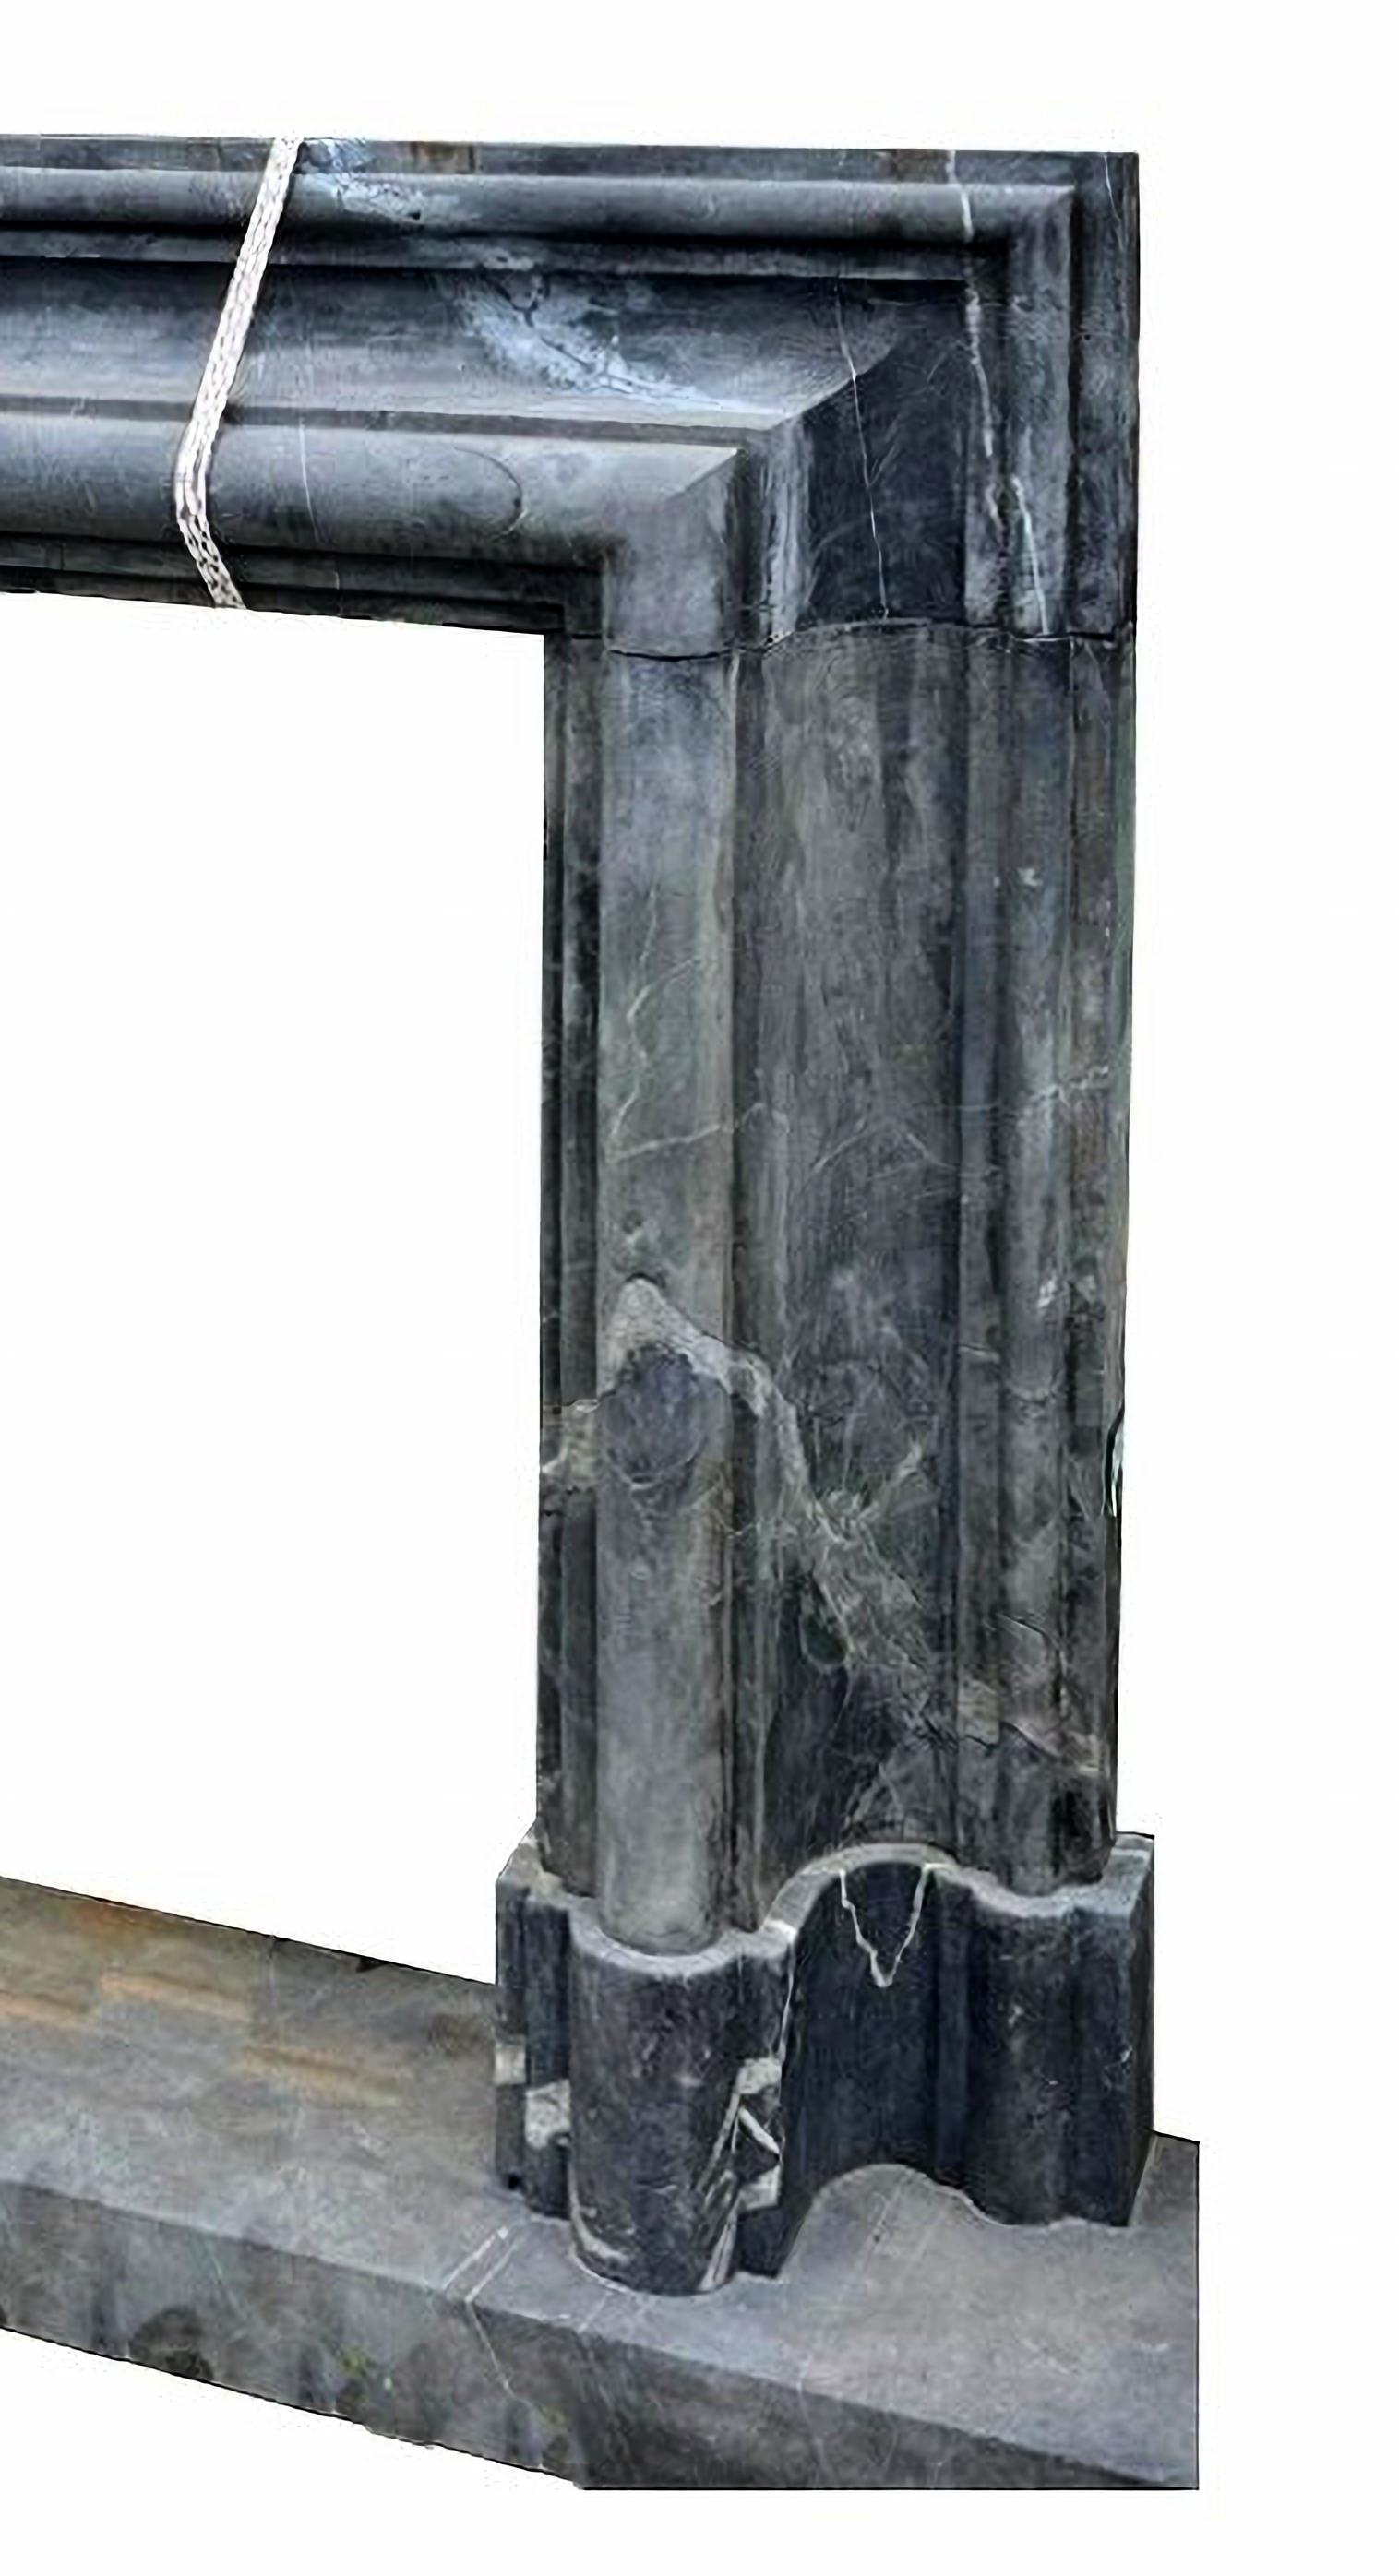 Fireplace Art D'eco SALVATOR ROSA IN BLACK MARBLE NERO MARQUINA 1890/1900

Fireplace from 1890/1900 in Spanish black marble Nero Marquina.
This fireplace comes with its own stone base.
fire mouth L 100 x H 85
Italy
HEIGHT 145 cm
WIDTH 160 cm
DEPTH